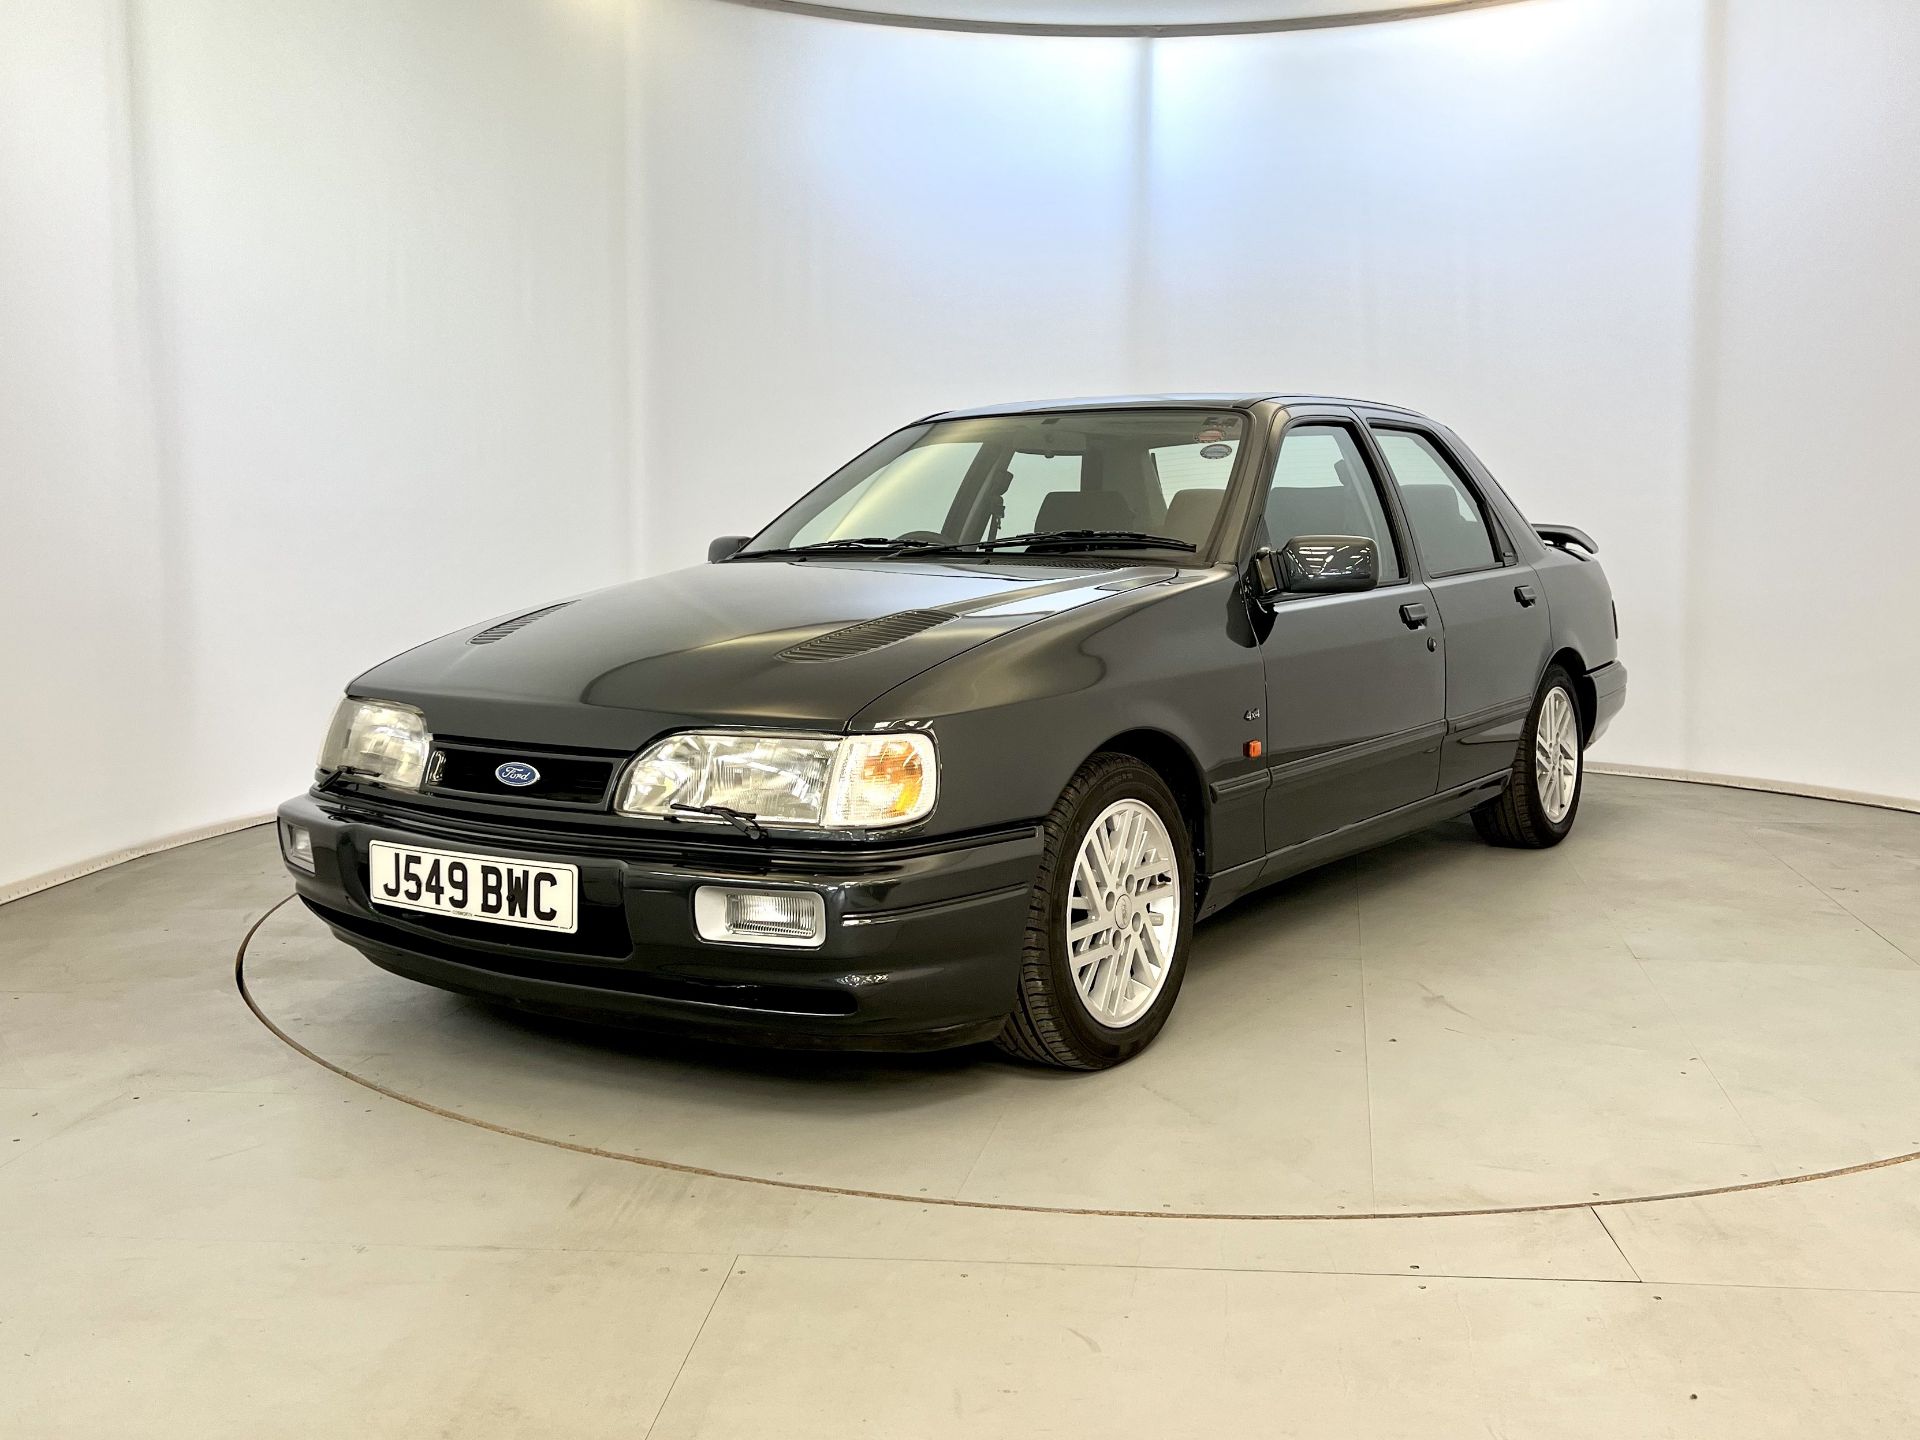 Ford Sierra Sapphire Cosworth - Image 3 of 37